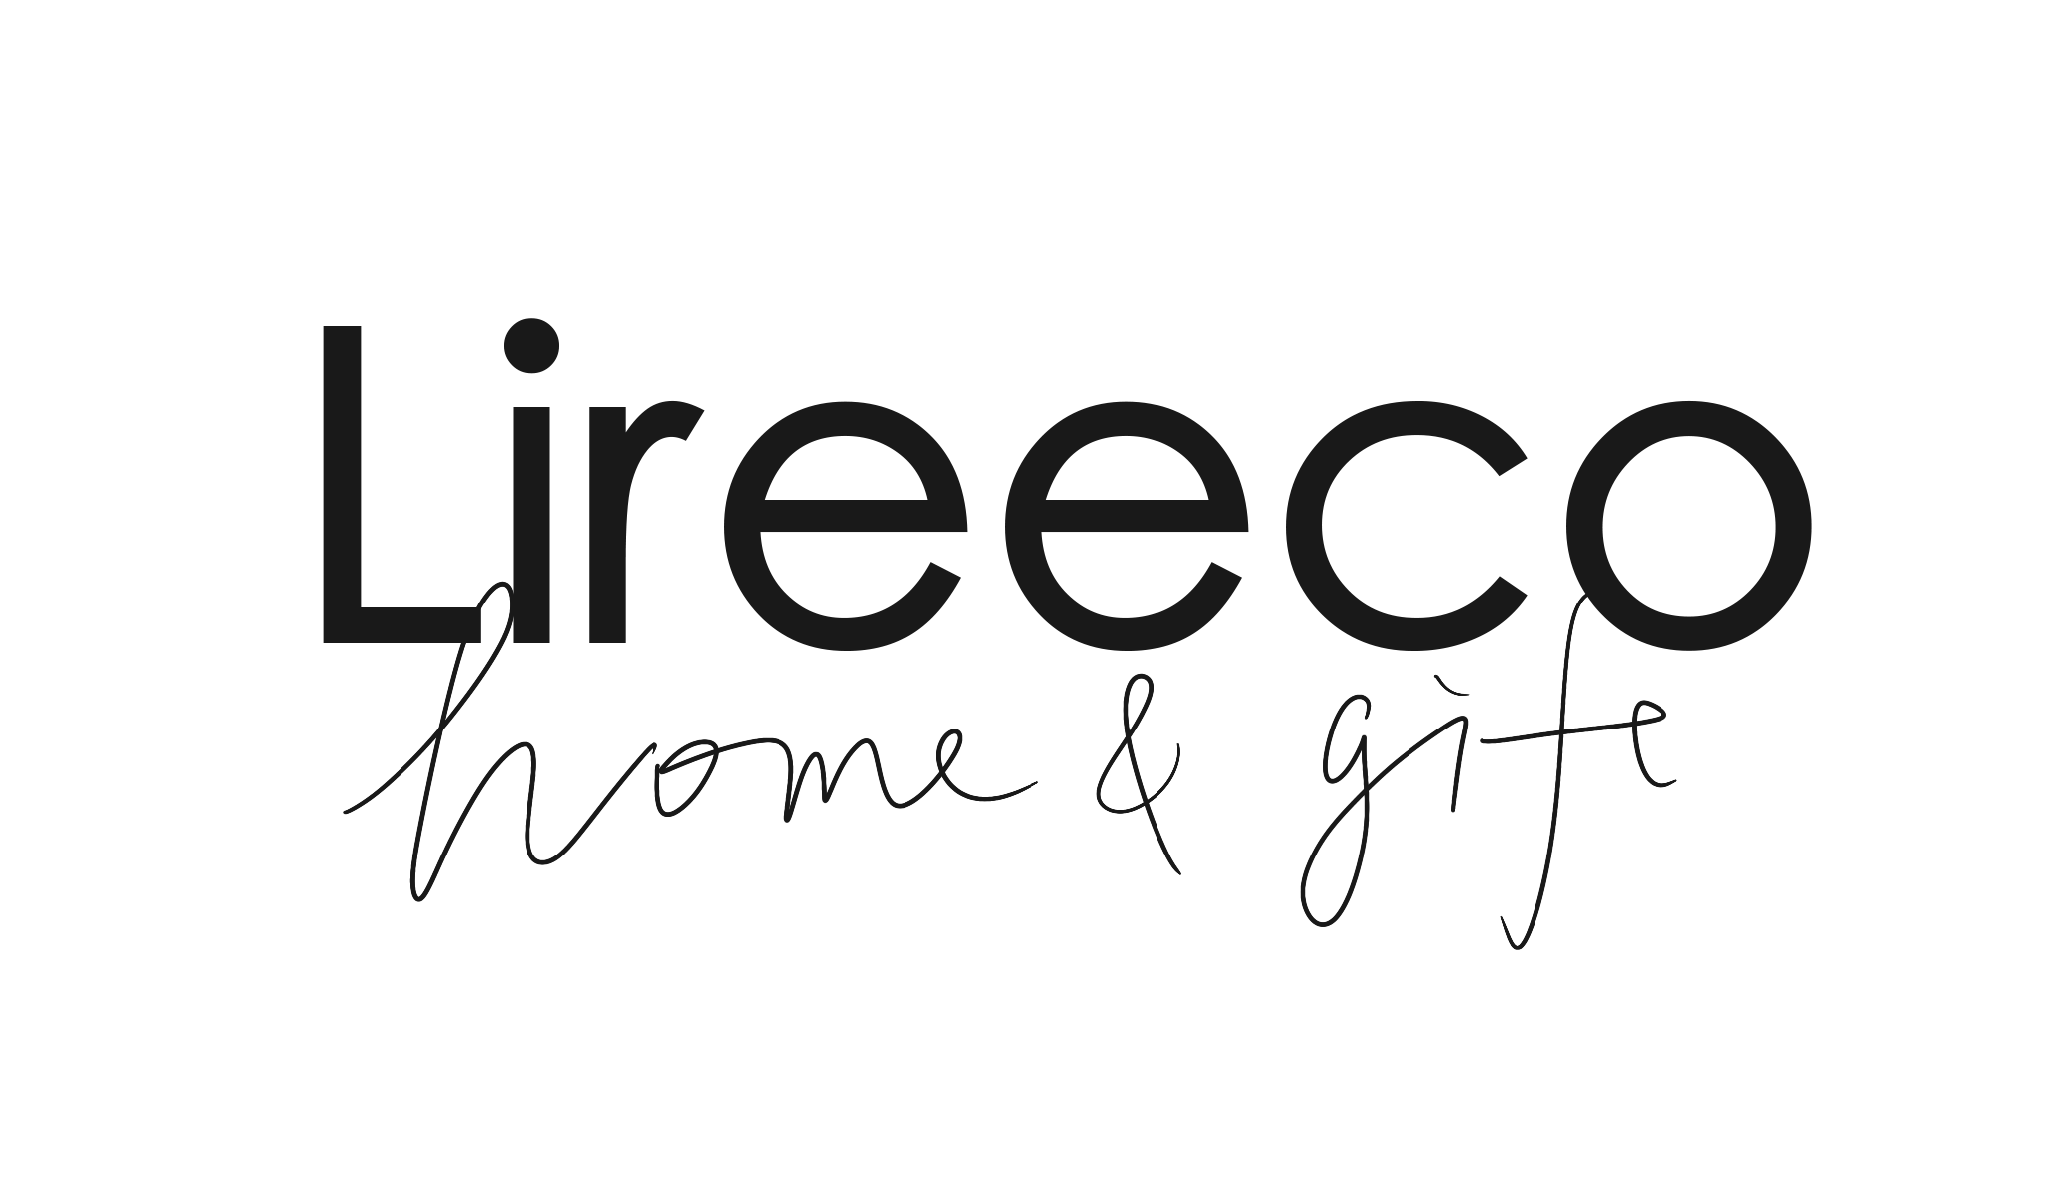 Find Stylish Christmas Decorations and Unique Holiday Gifts at Lireeco's Christmas Sale Now